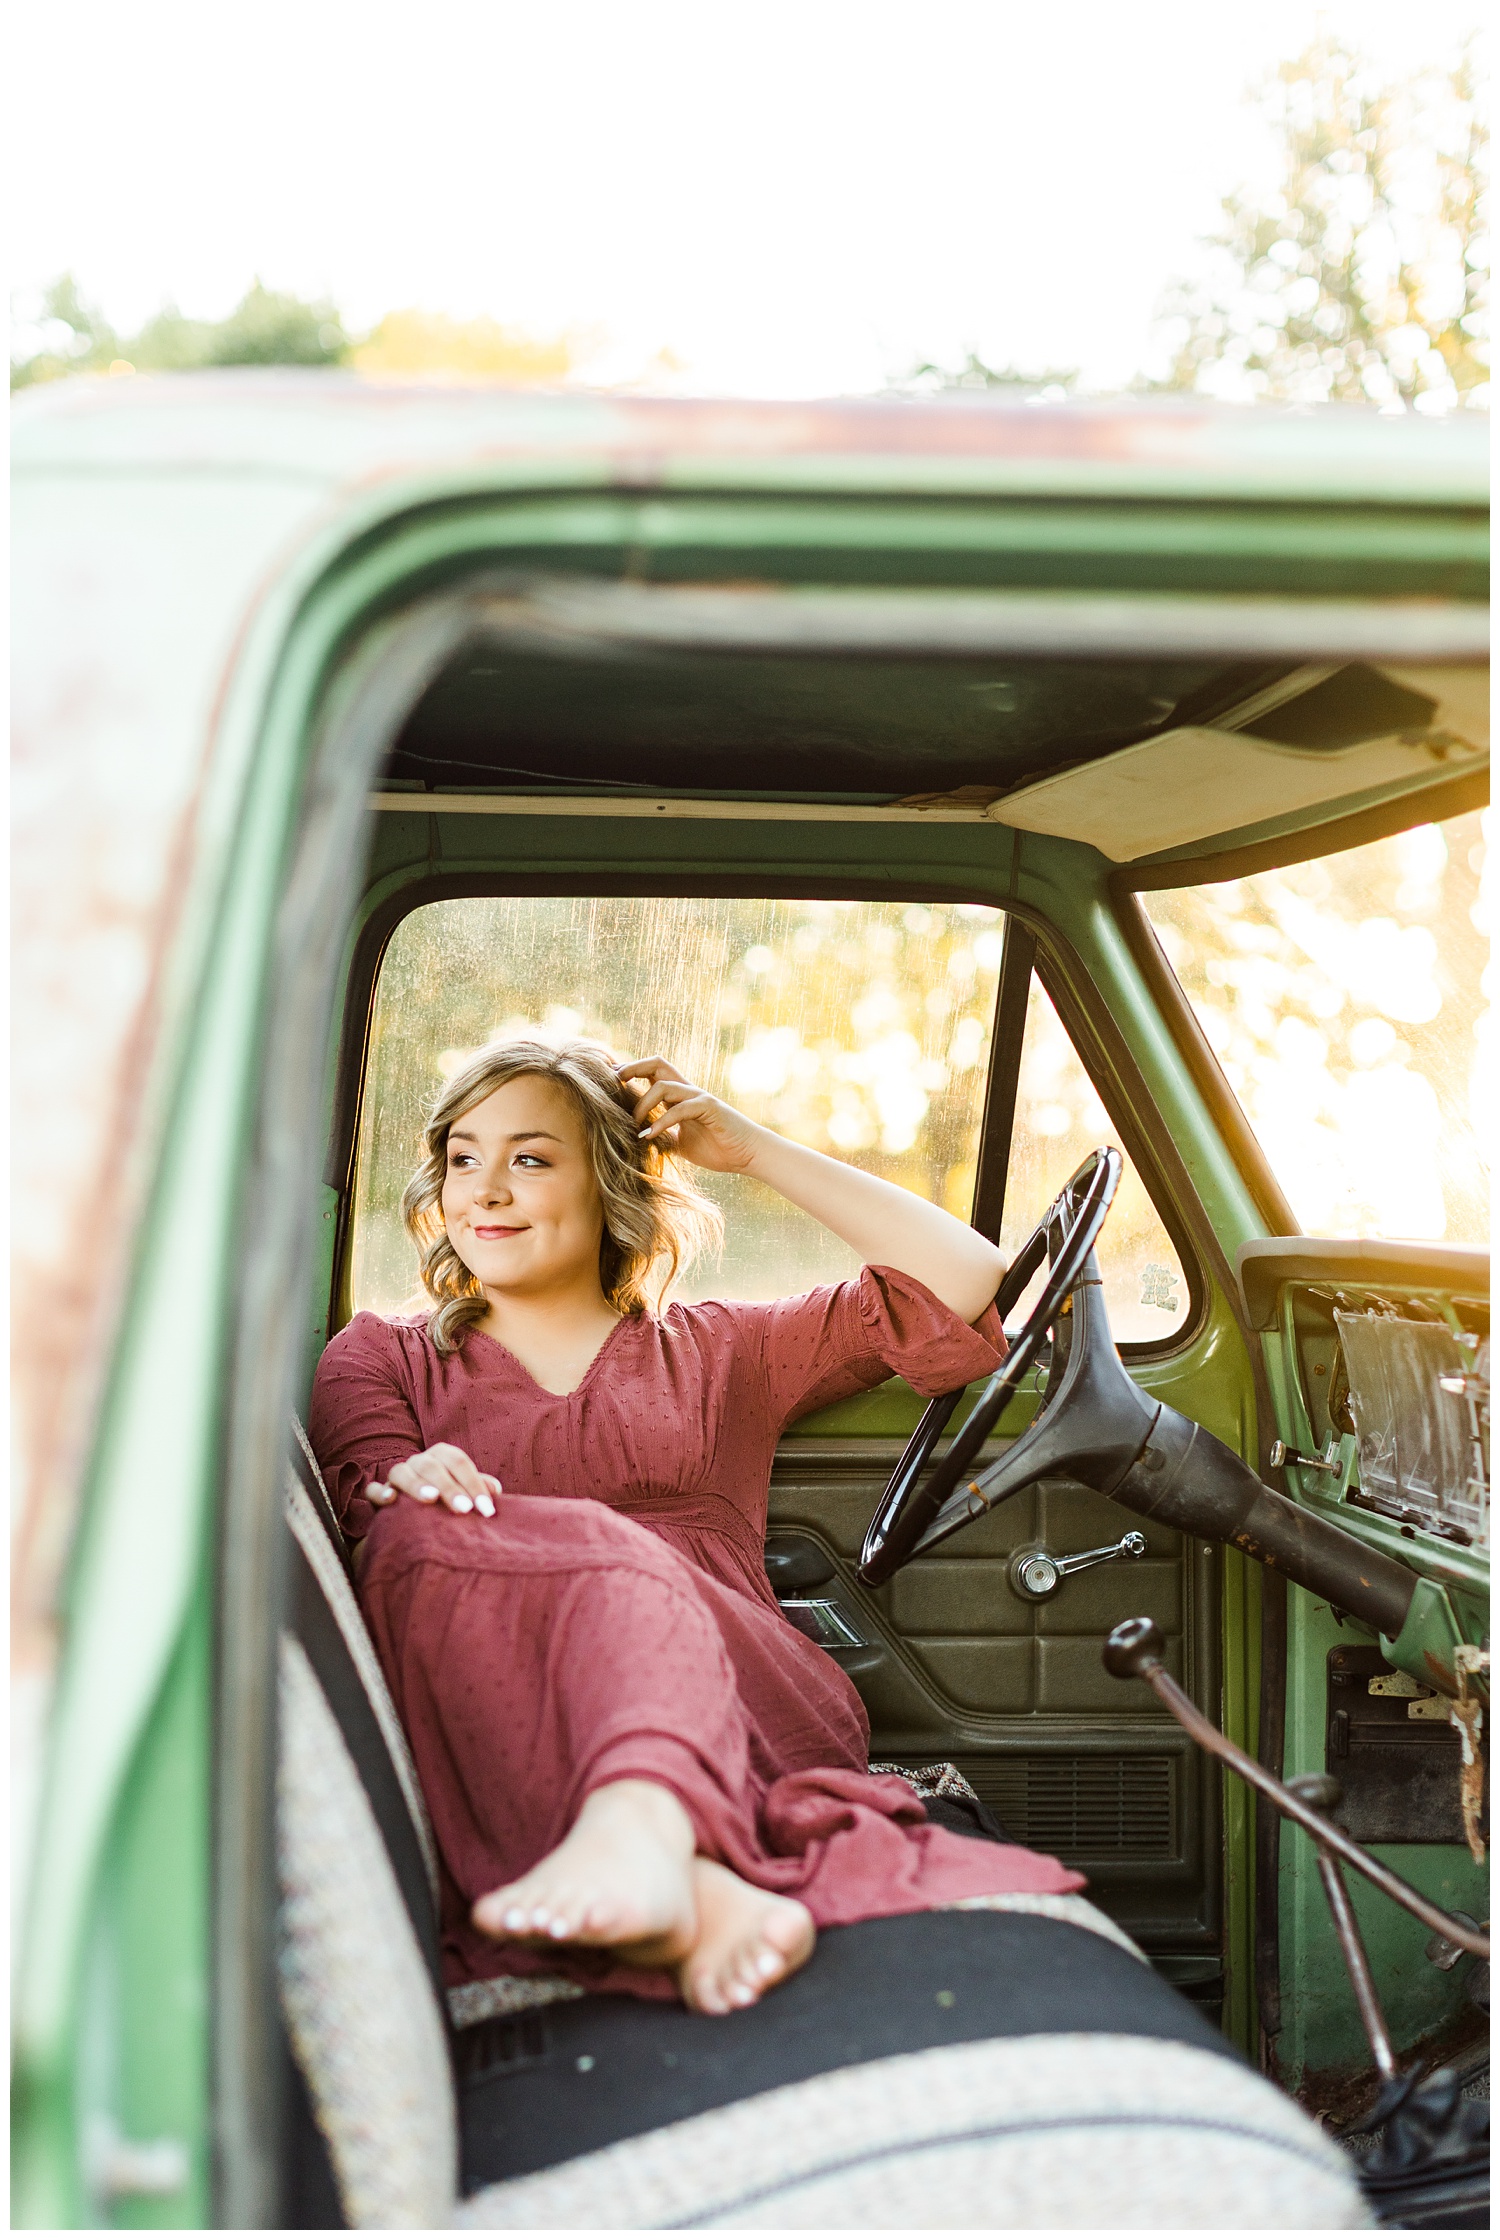 Cloey, wearing a vintage red dress, sits in an old, rusty green truck at golden hour | CB Studio